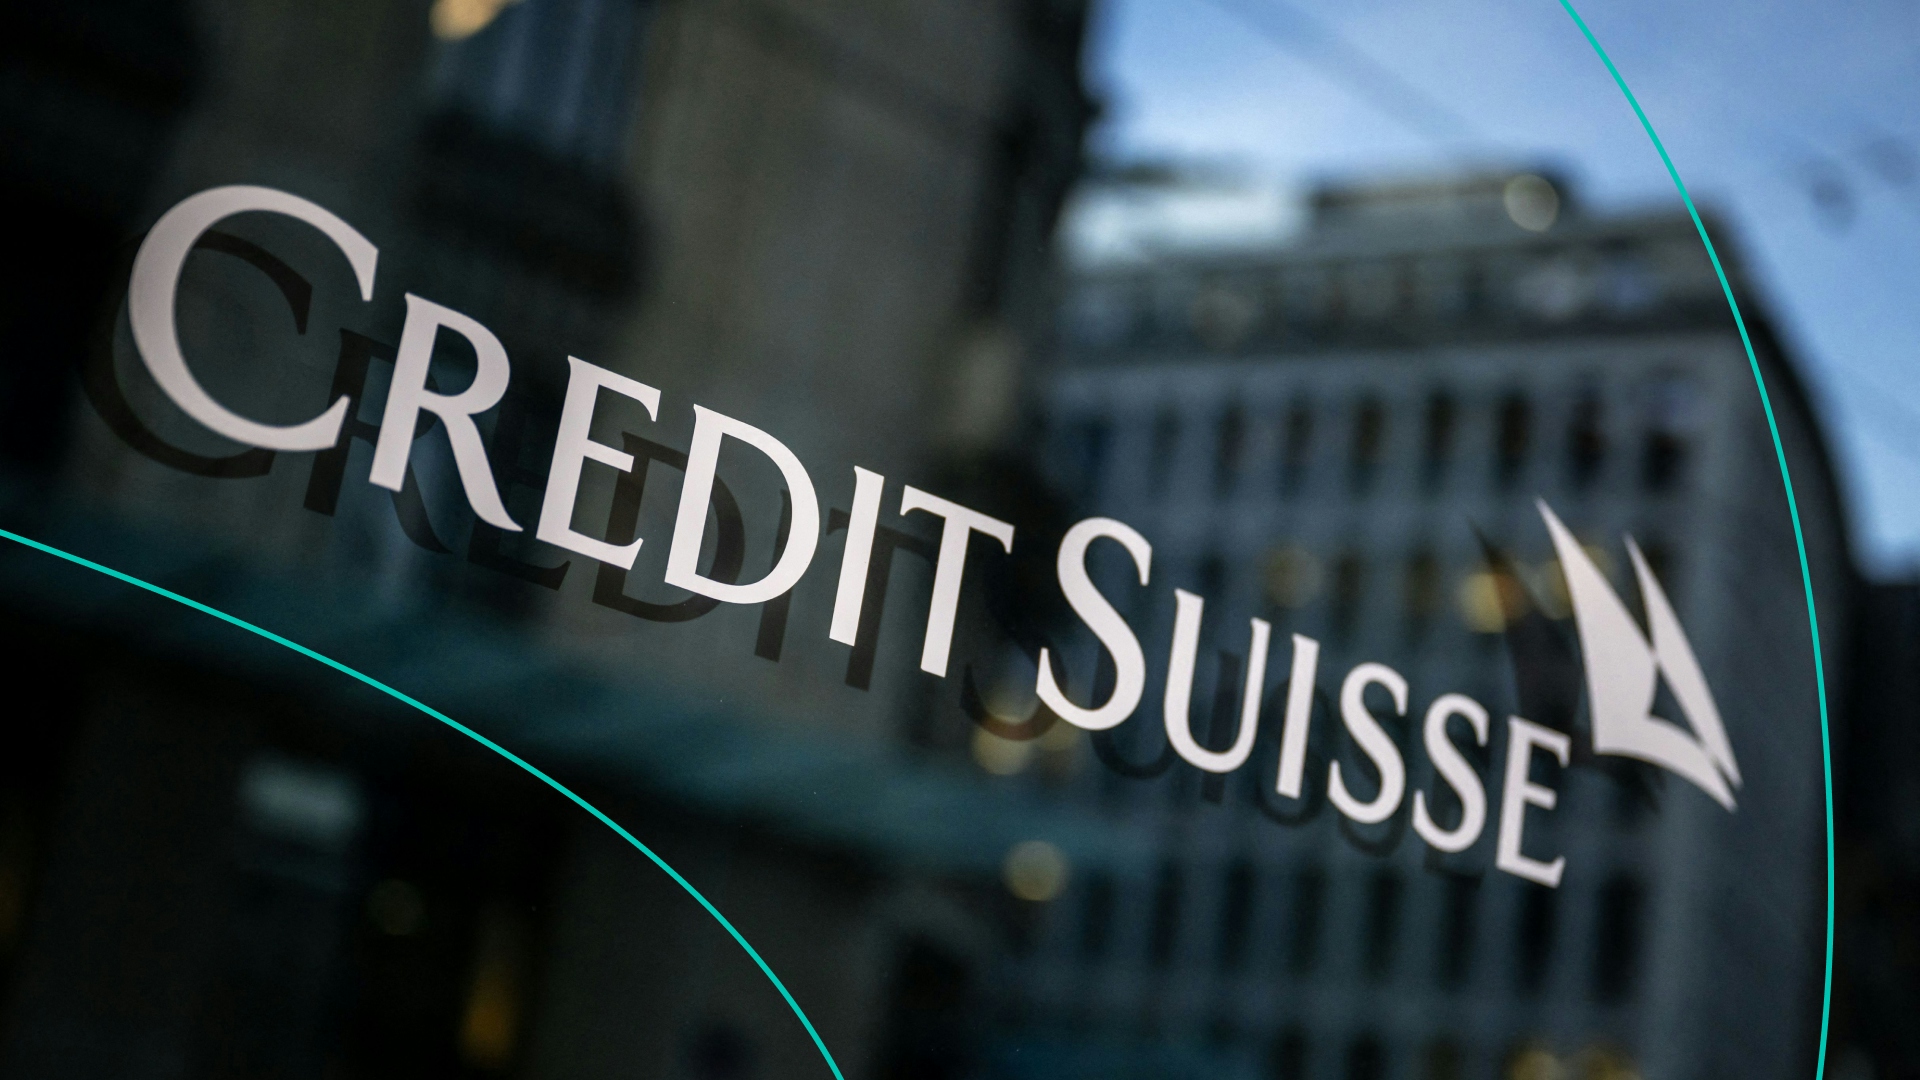 Credit Suisse shares nosedived on March 15, 2023, after its main shareholder said it would not provide more funding.